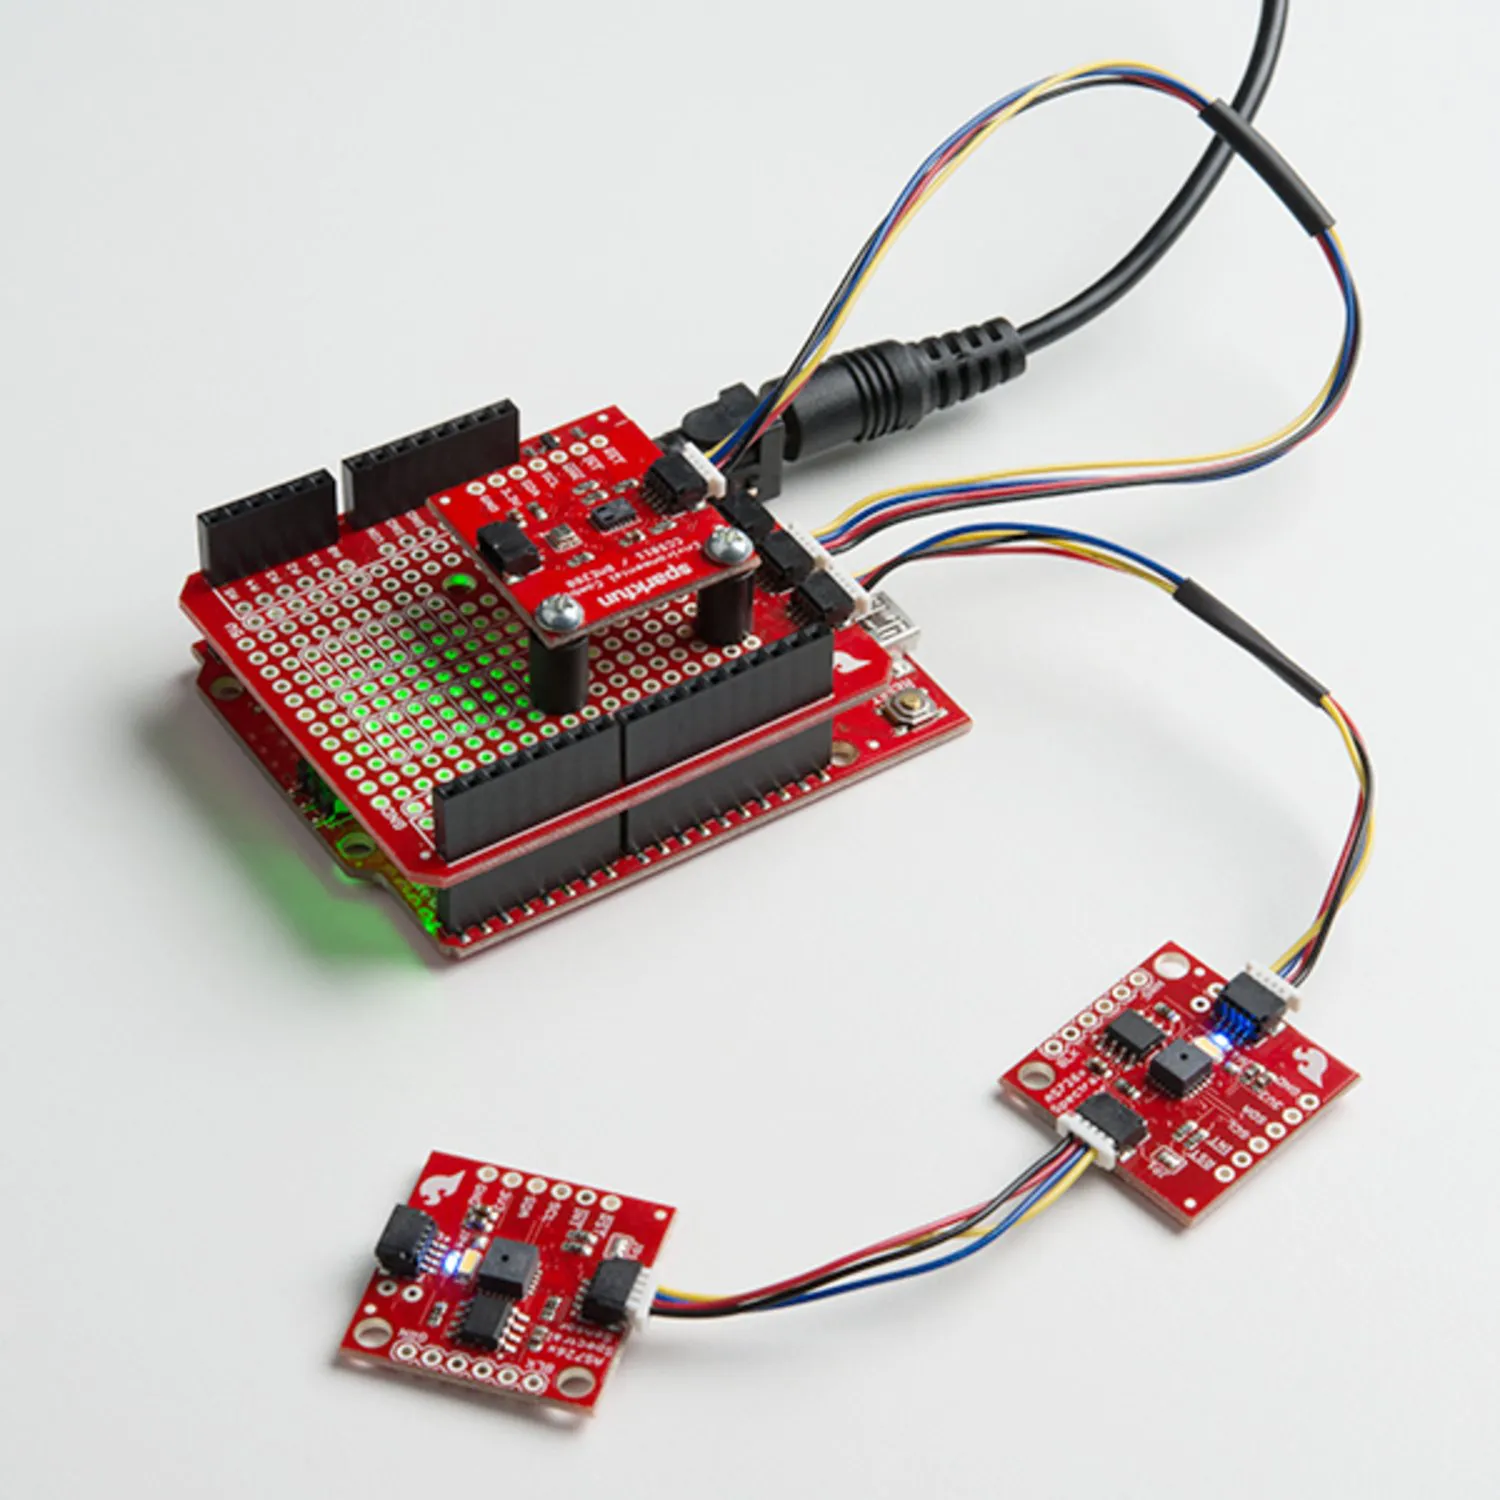 Photo of SparkFun Spectral Sensor Breakout - AS7262 Visible (Qwiic)